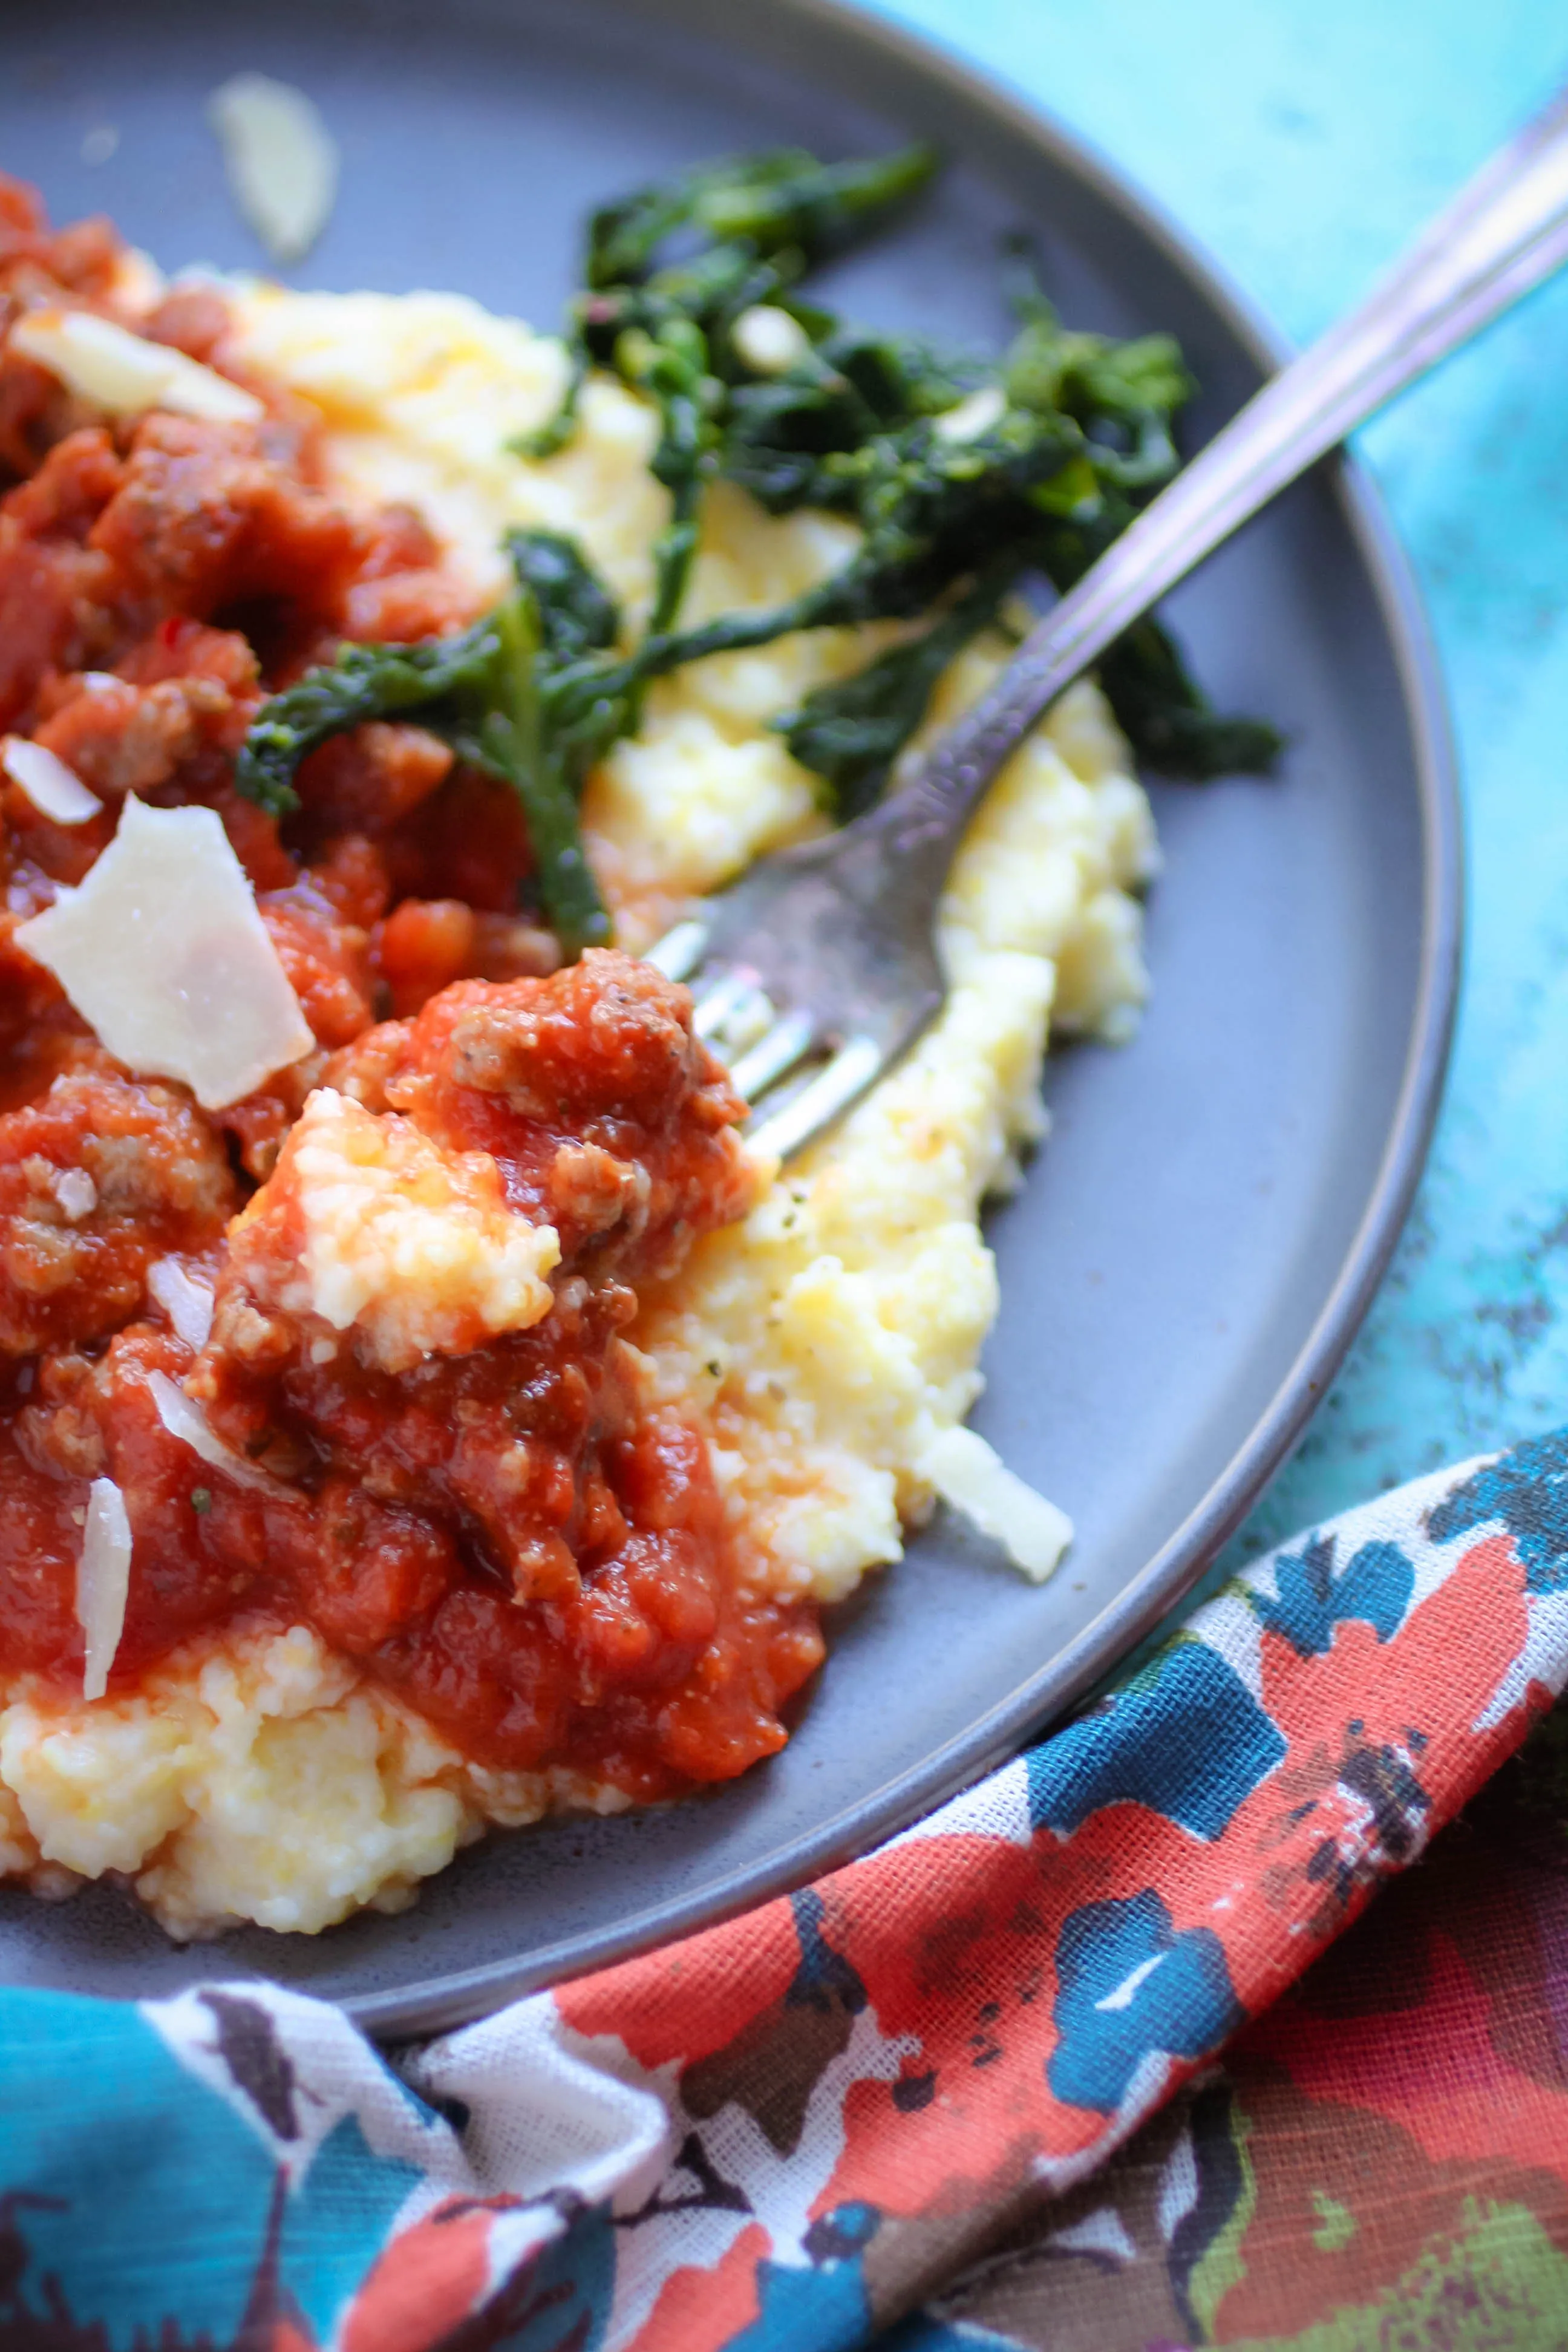 Polenta with Sausage and Red Sauce is a great dish to dig into. Polenta with Sausage and Red Sauce is a tasty dish for the winter.